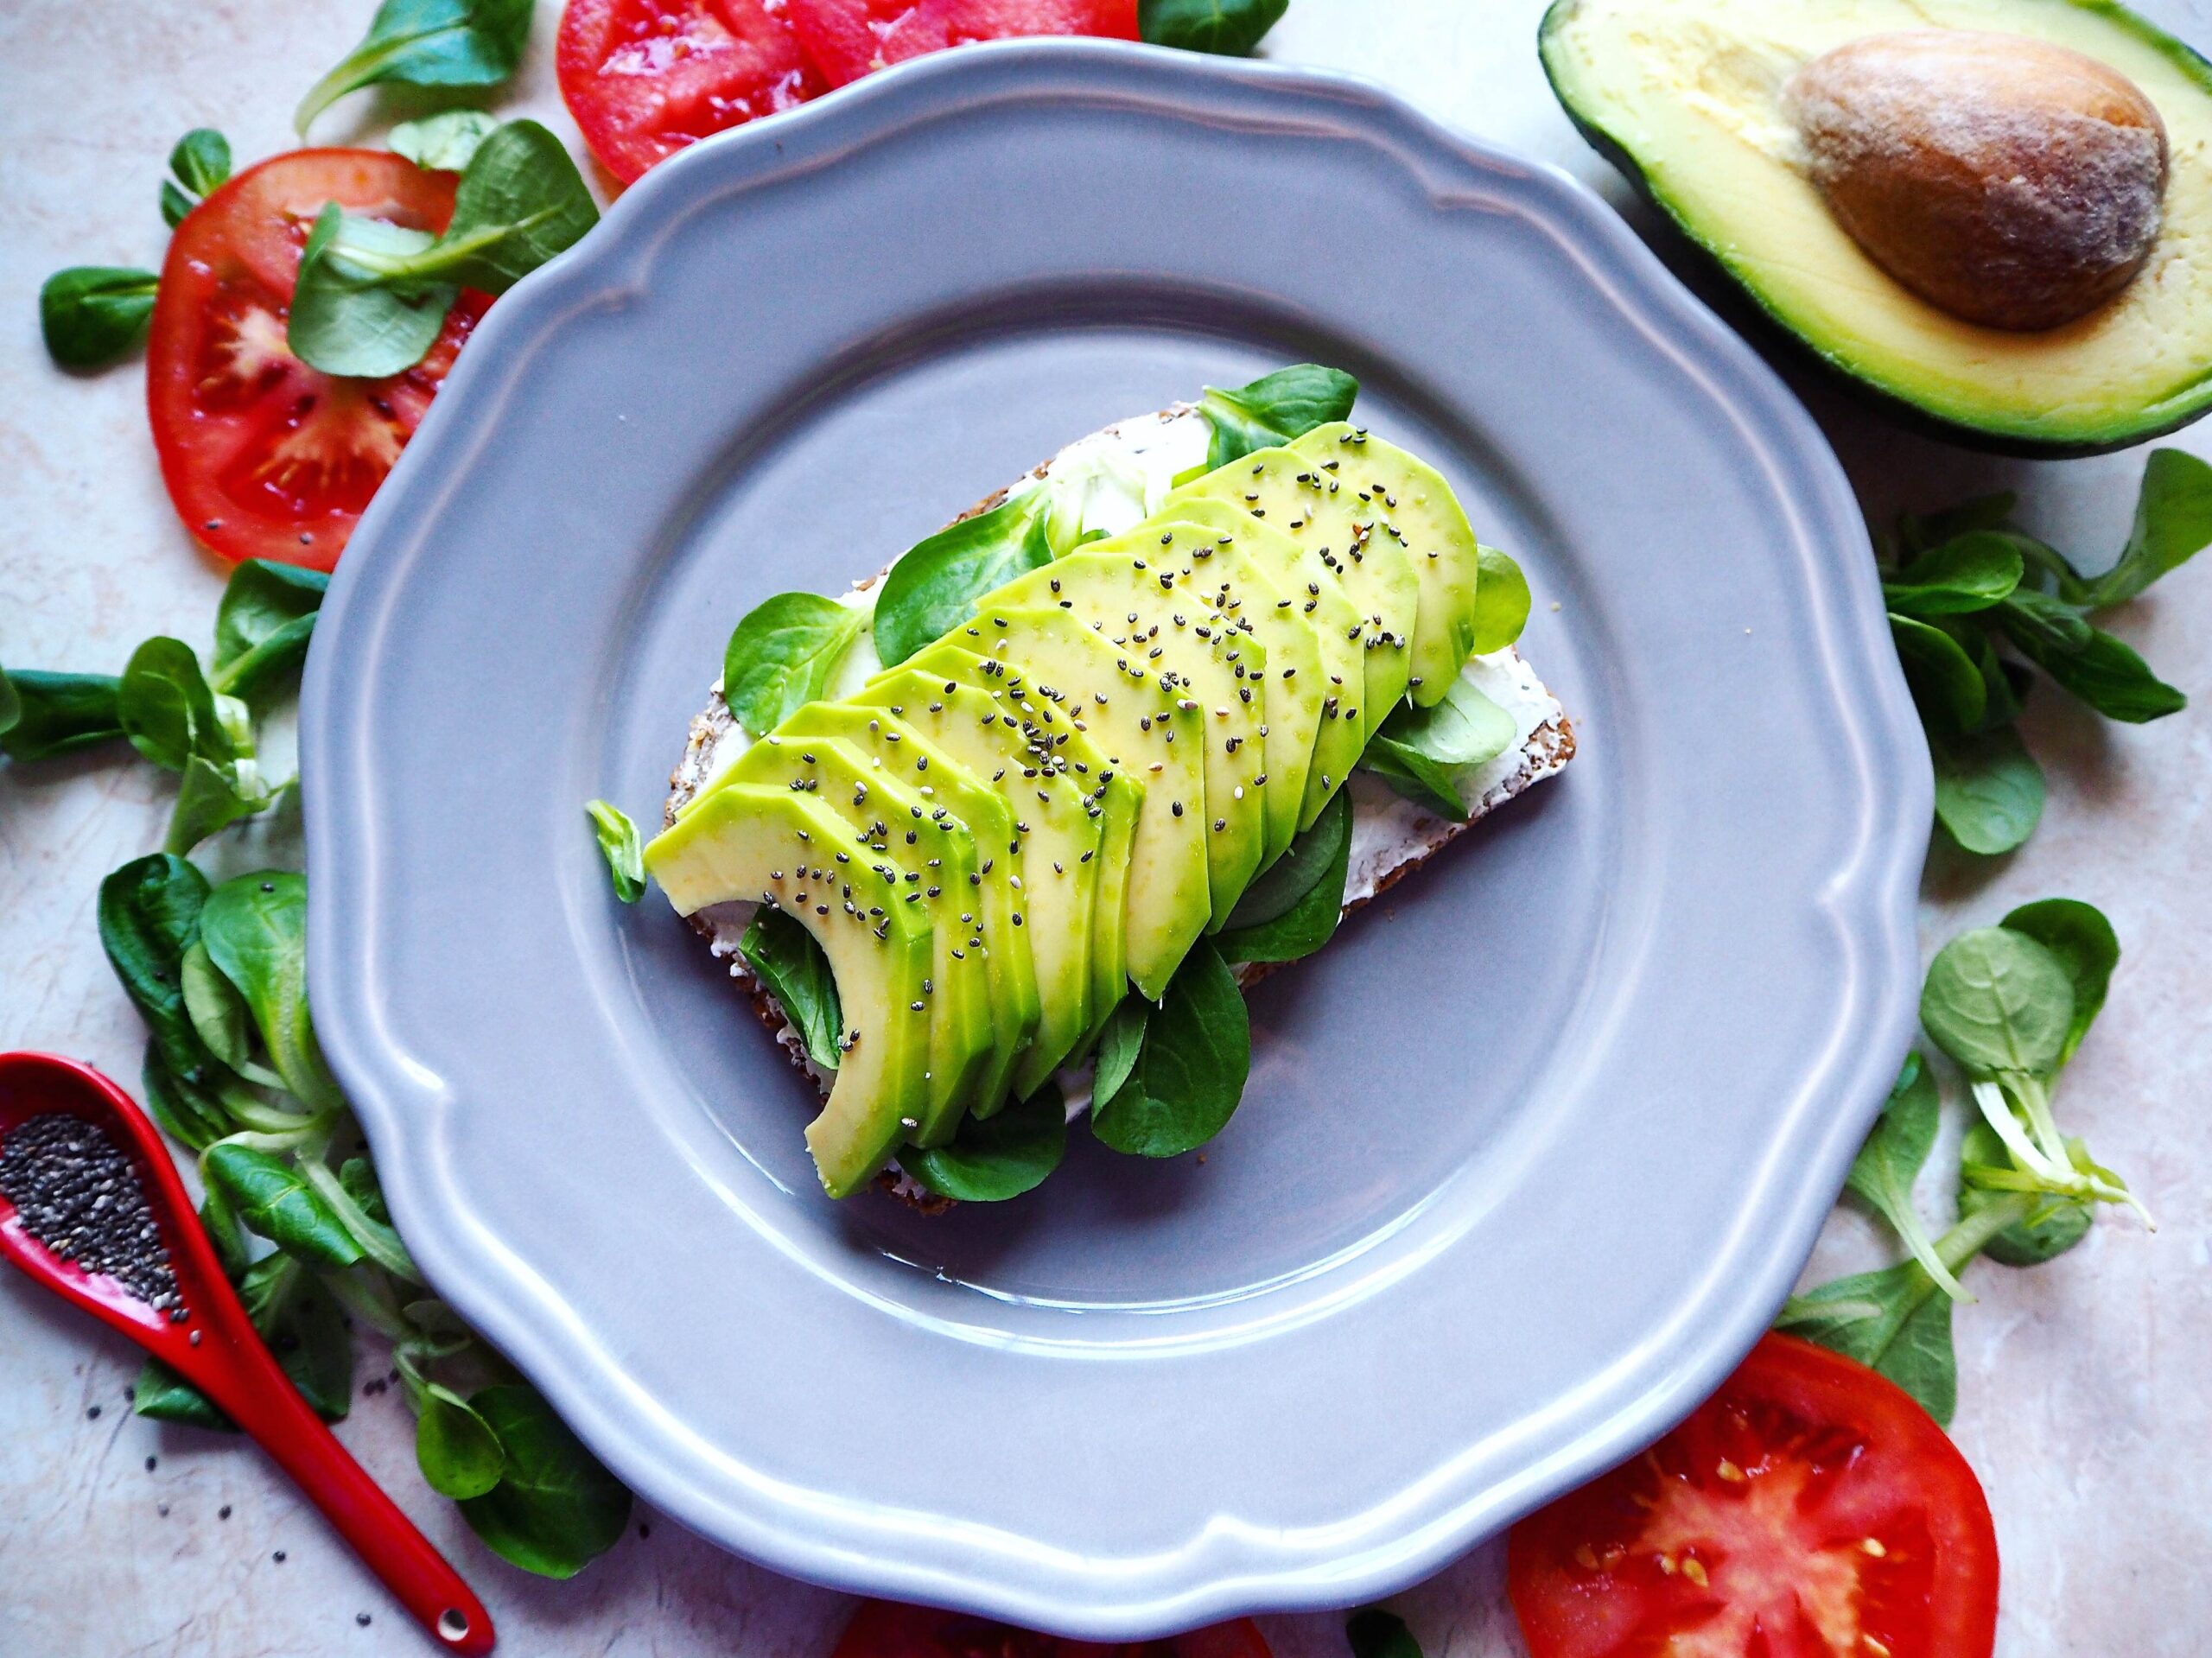 Why is avocado good for you?